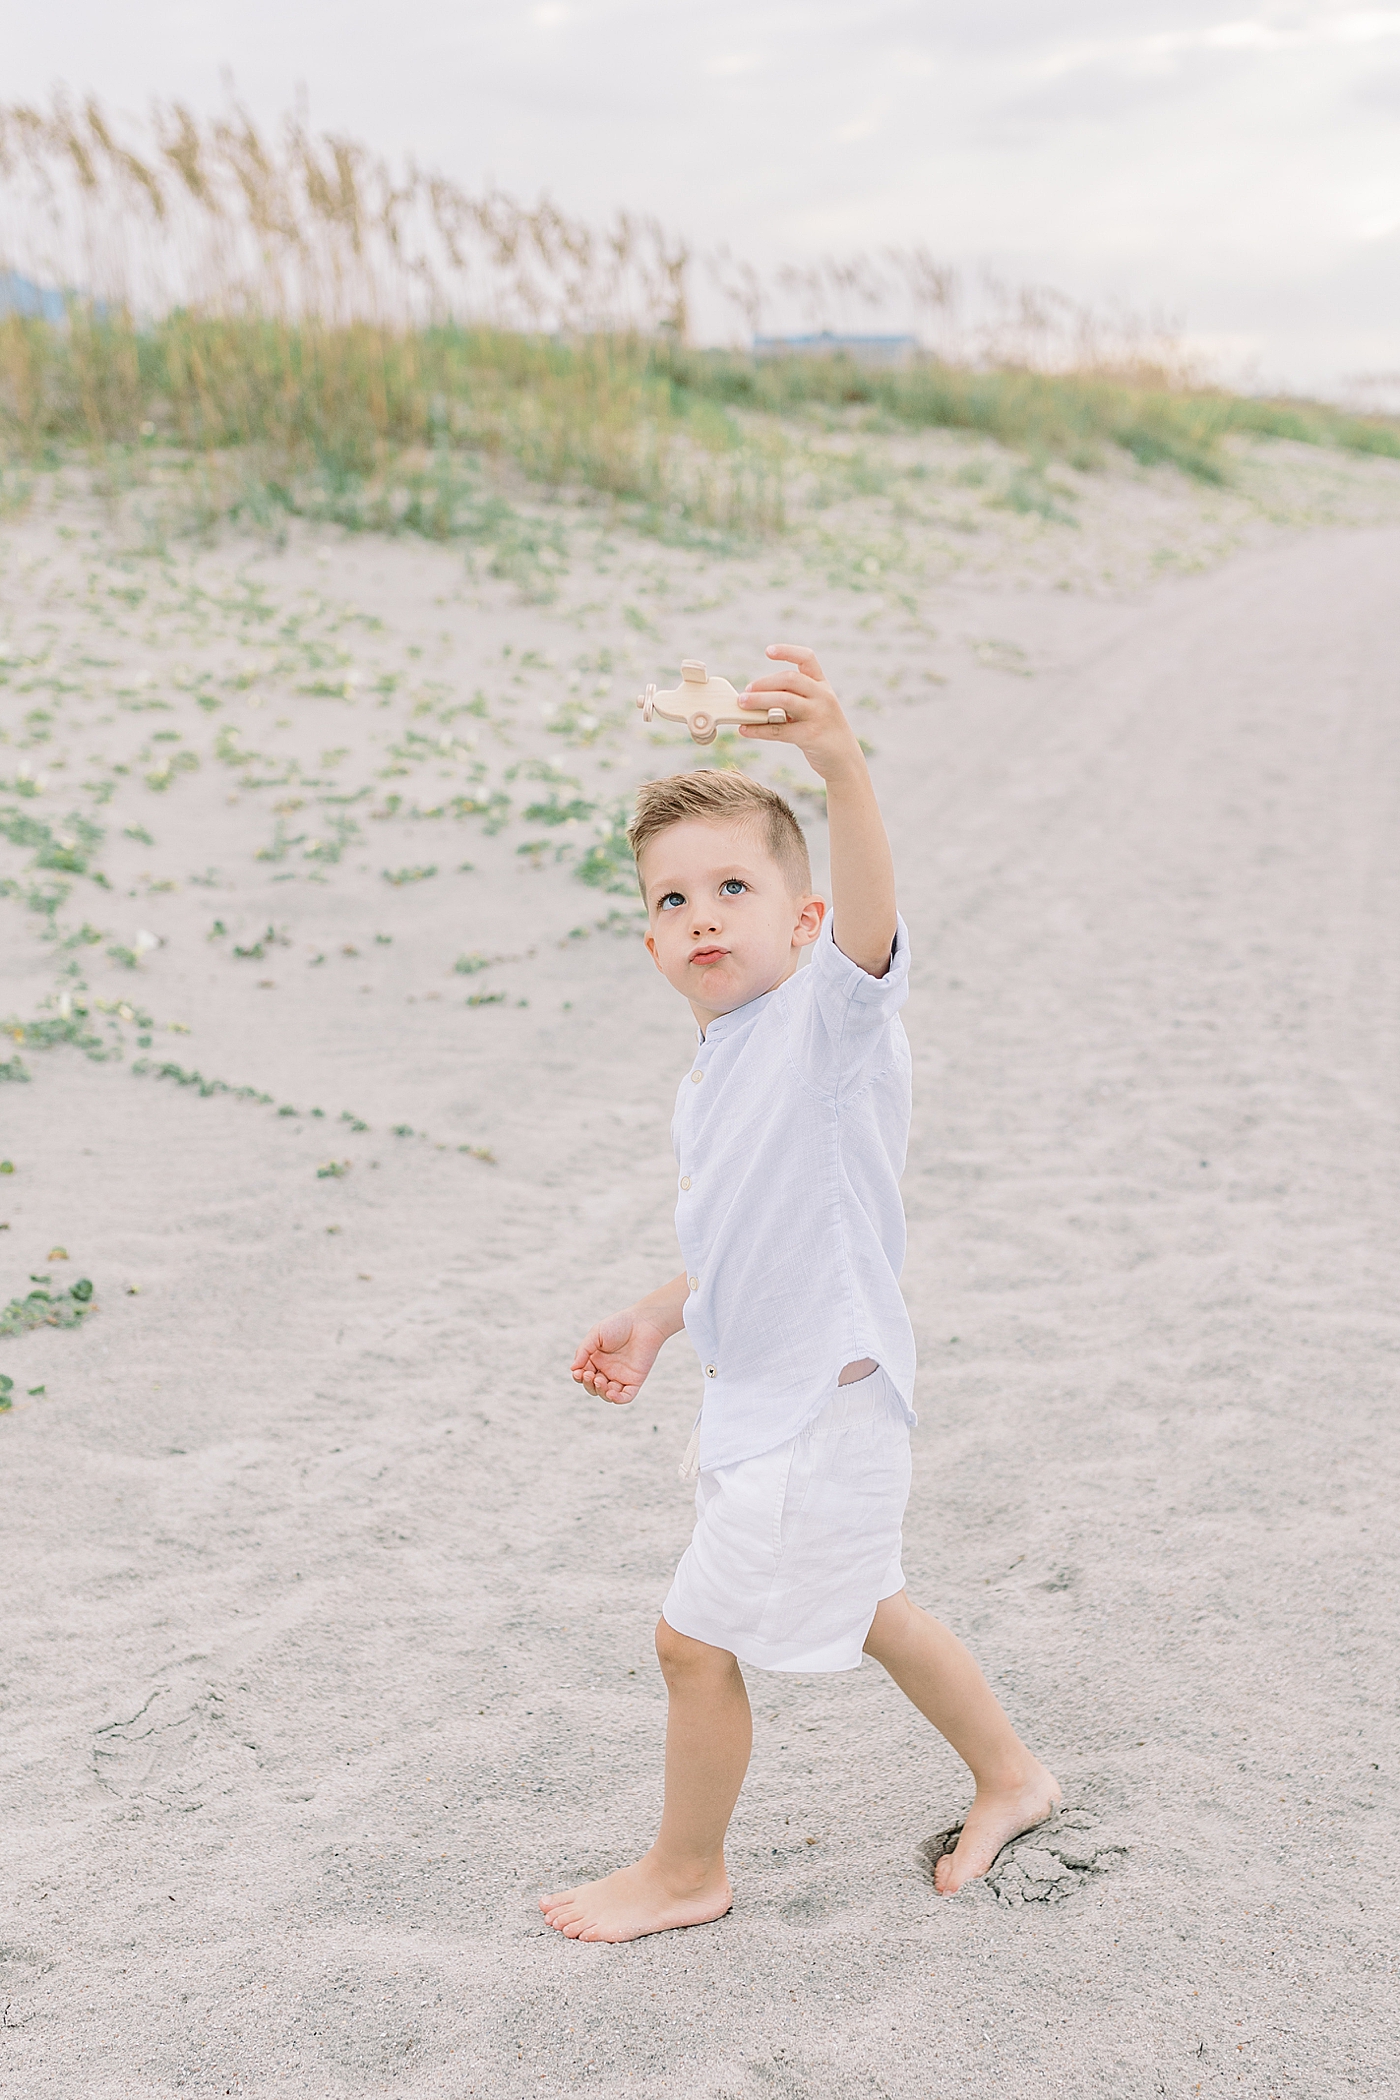 Little boy playing with a wooden airplane on the beach | Image by Caitlyn Motycka